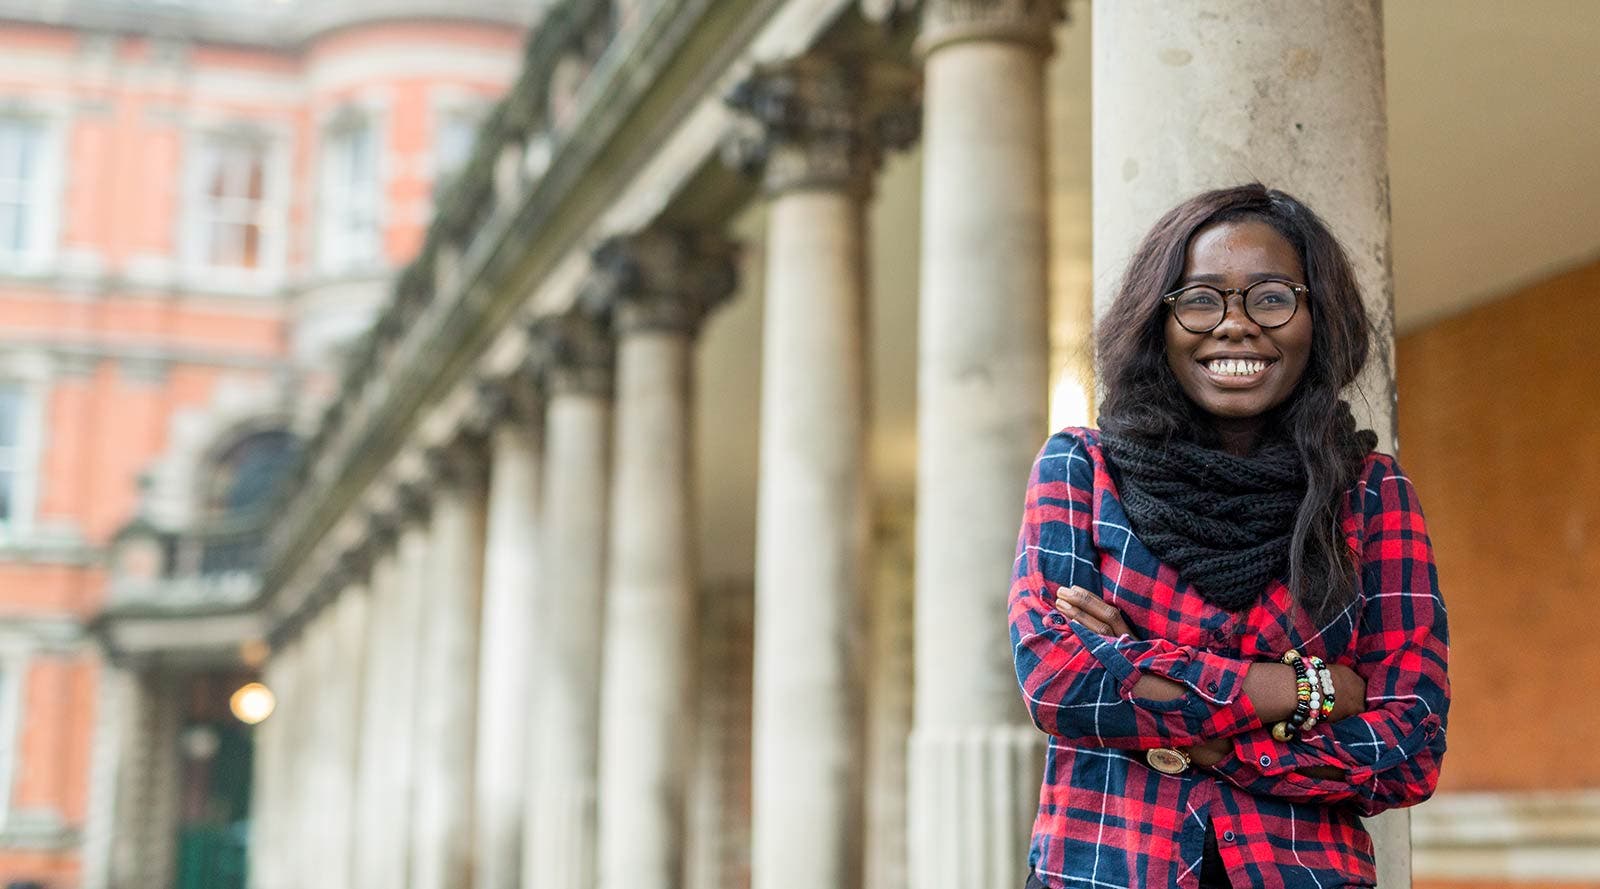 Christabel, an international student standing on RHUL campus